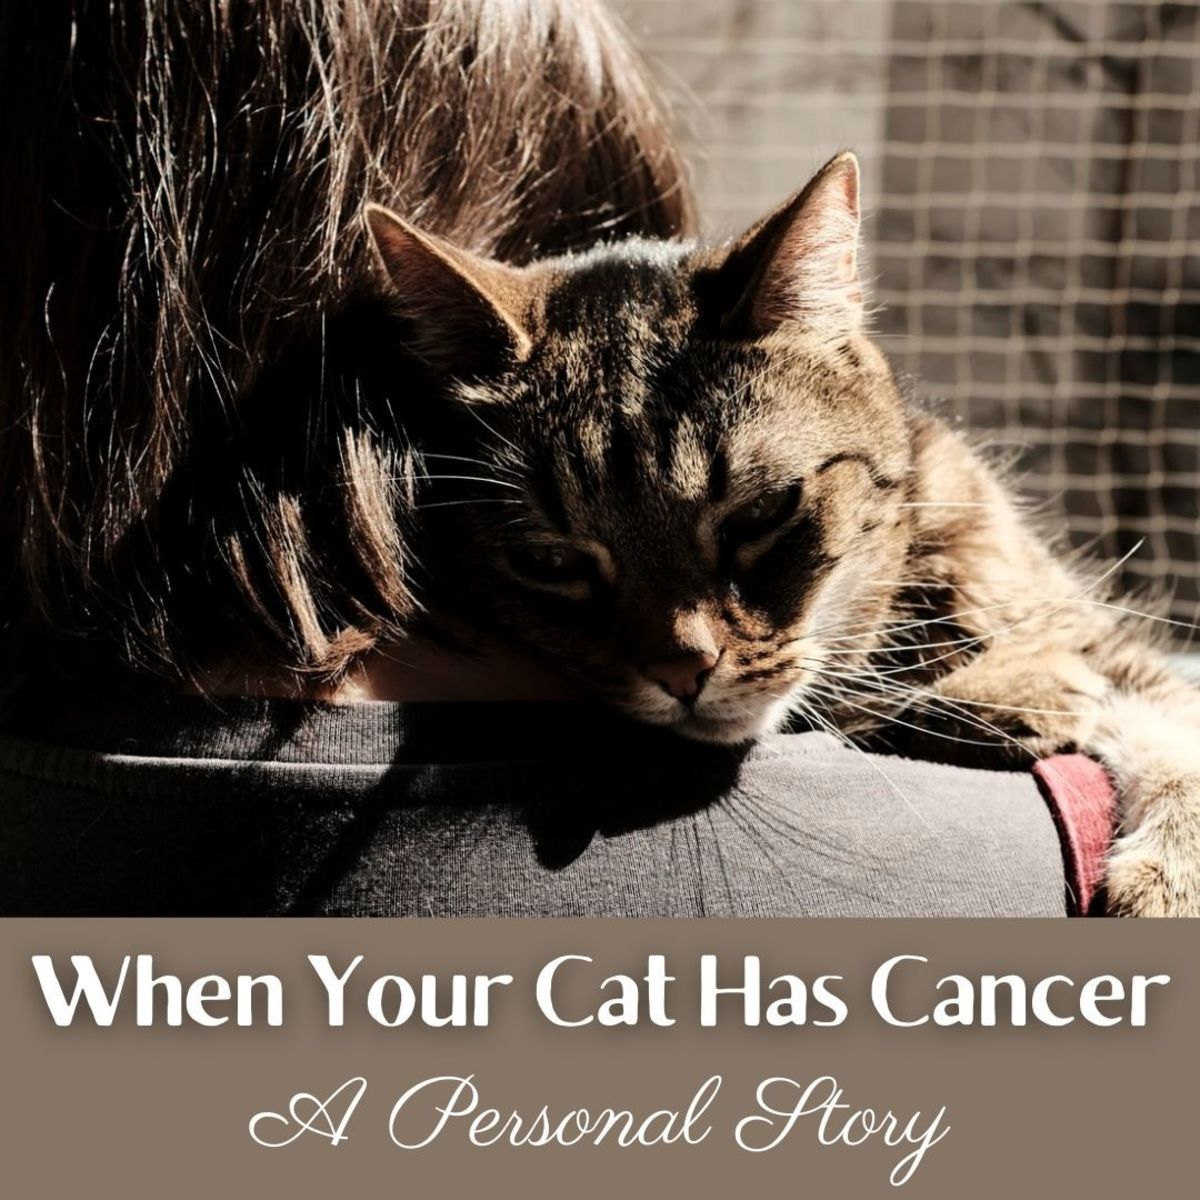 My Cat Has Cancer: A Personal Journey